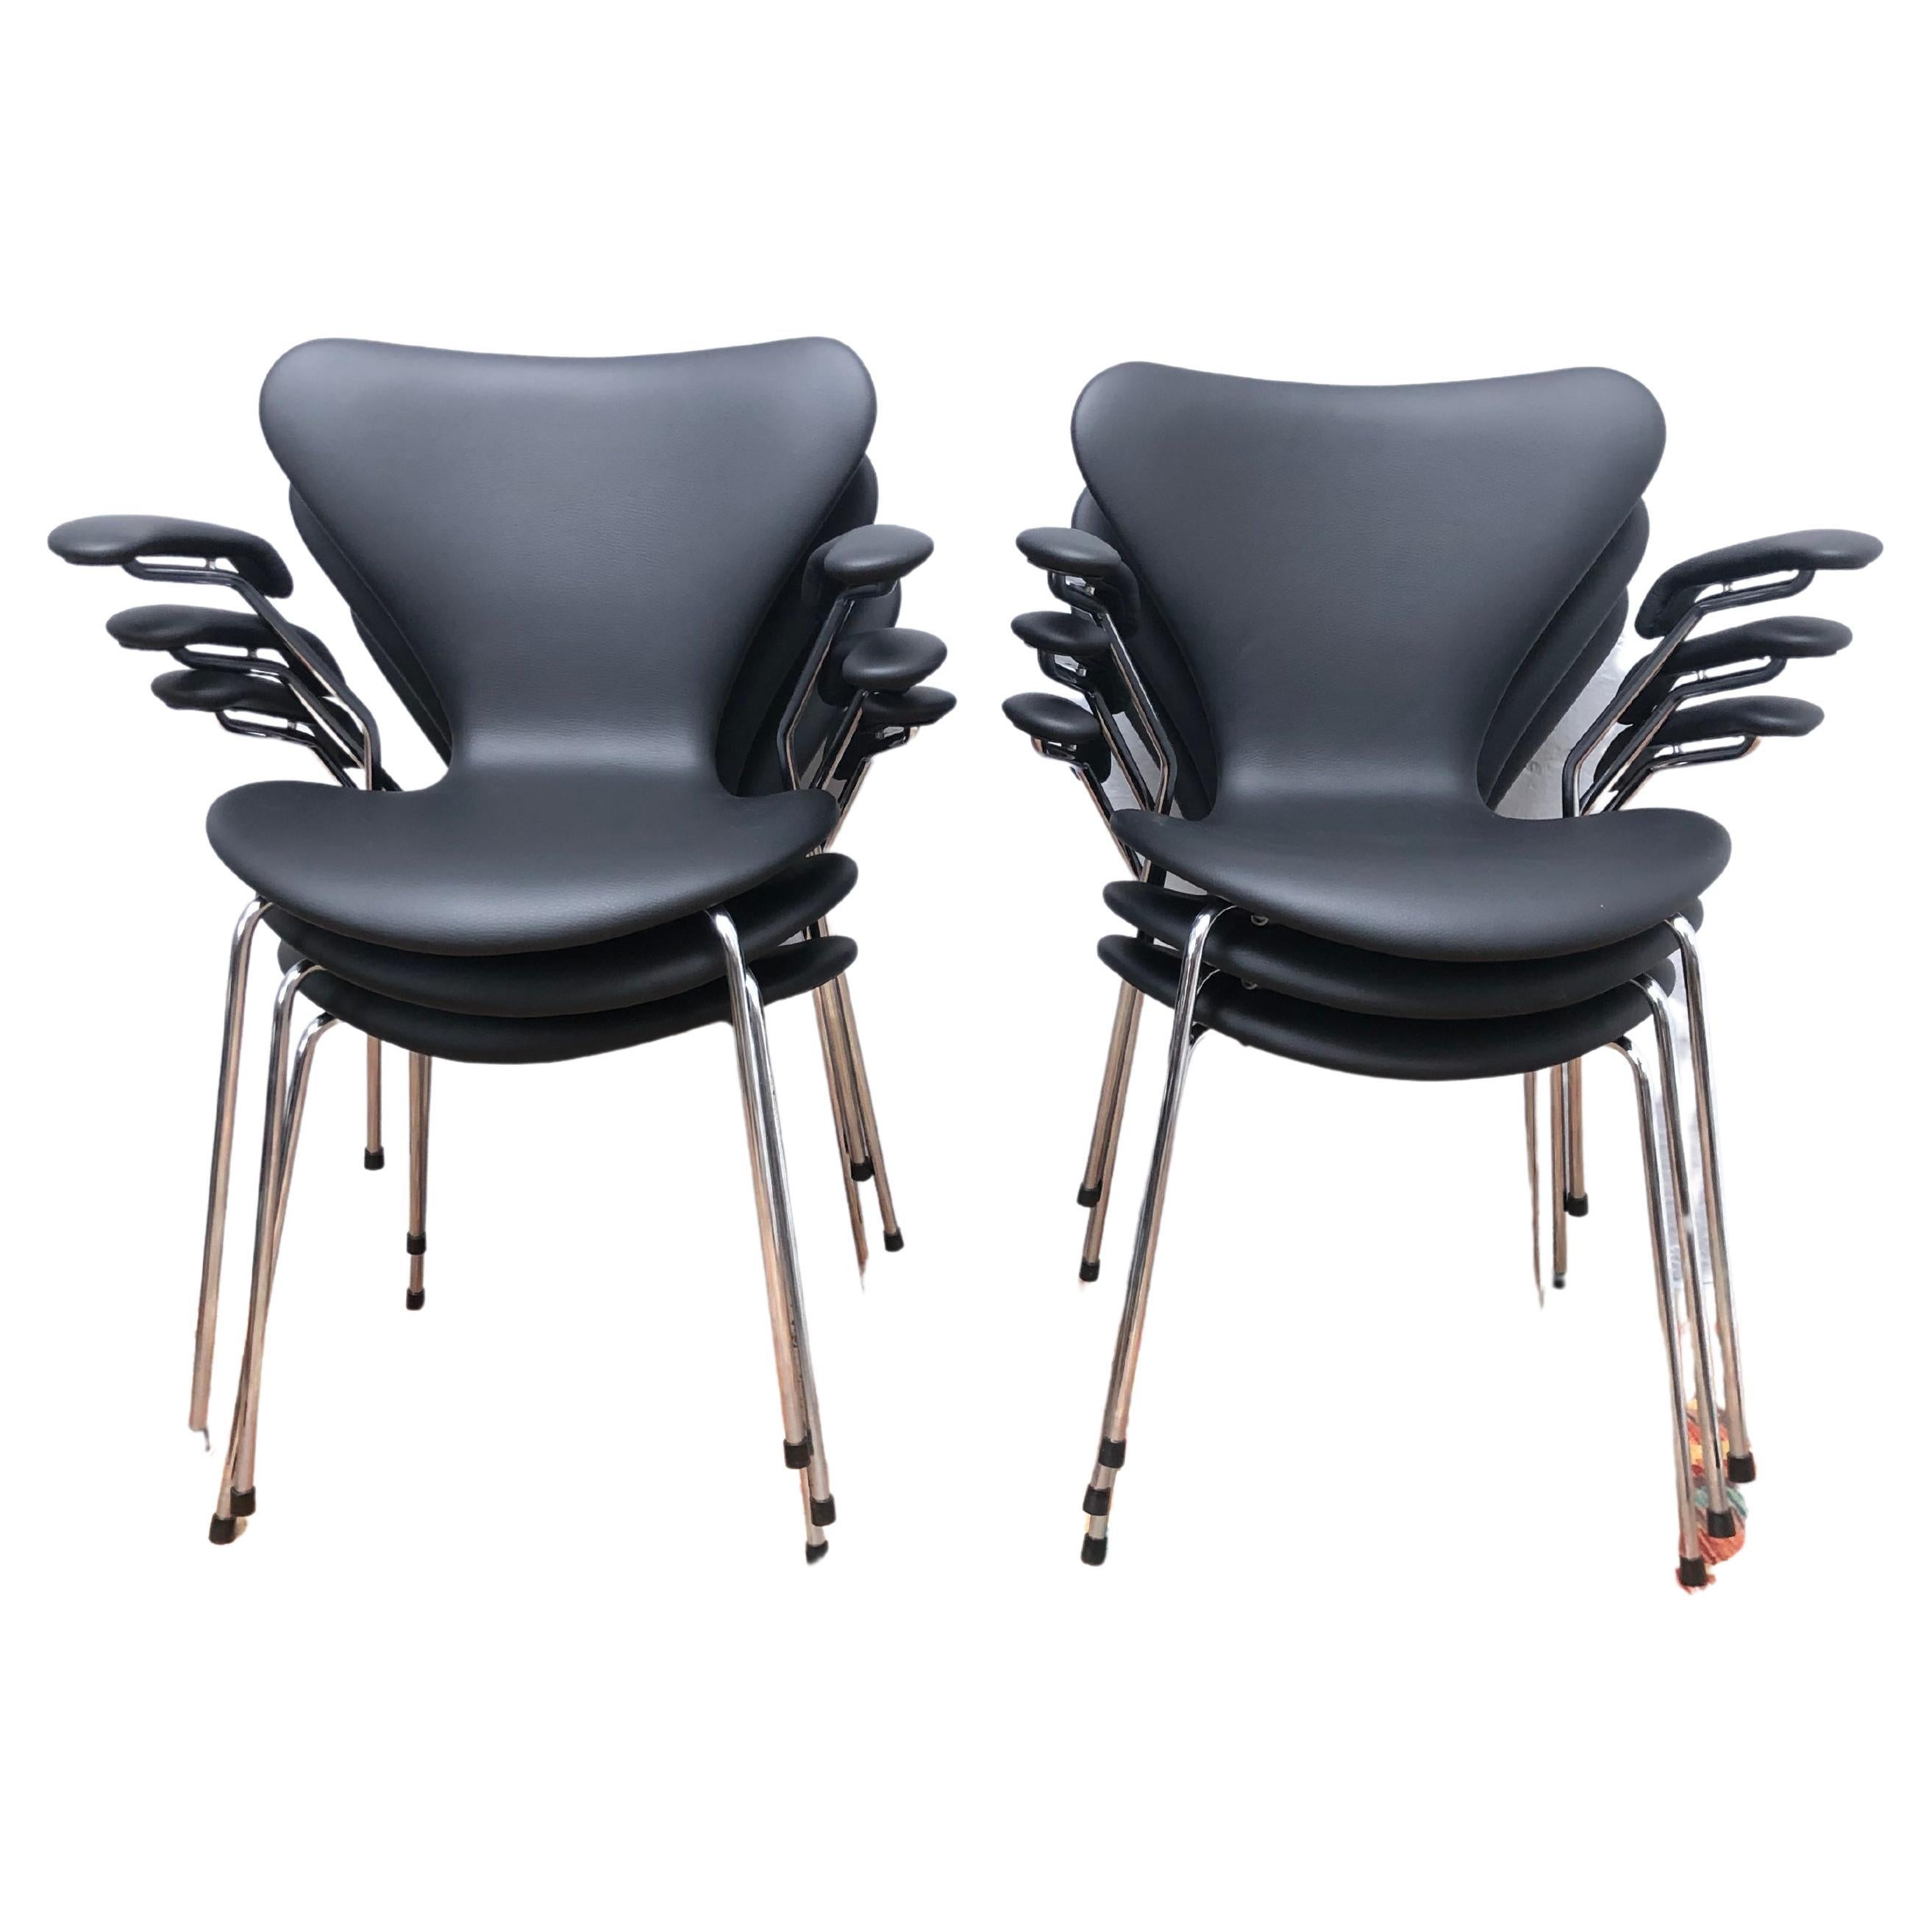 Vintage Set of 6 Iconic Arne Jacobsen 3207 Chairs Designed in 1955